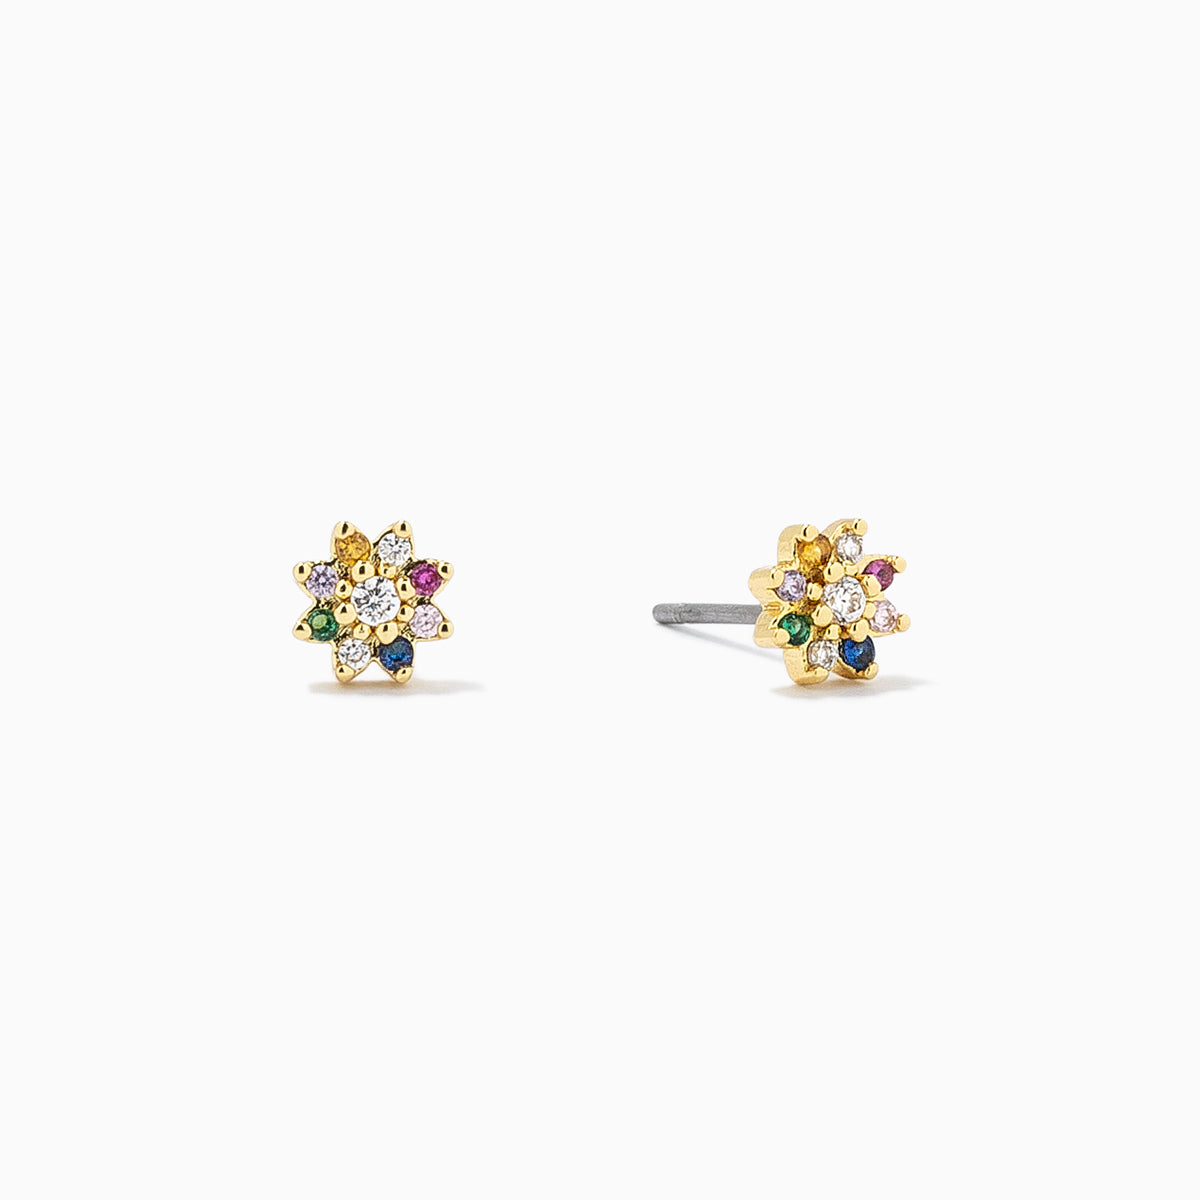 Colorful Flower Stud Earrings | Gold | Product Image | Uncommon James